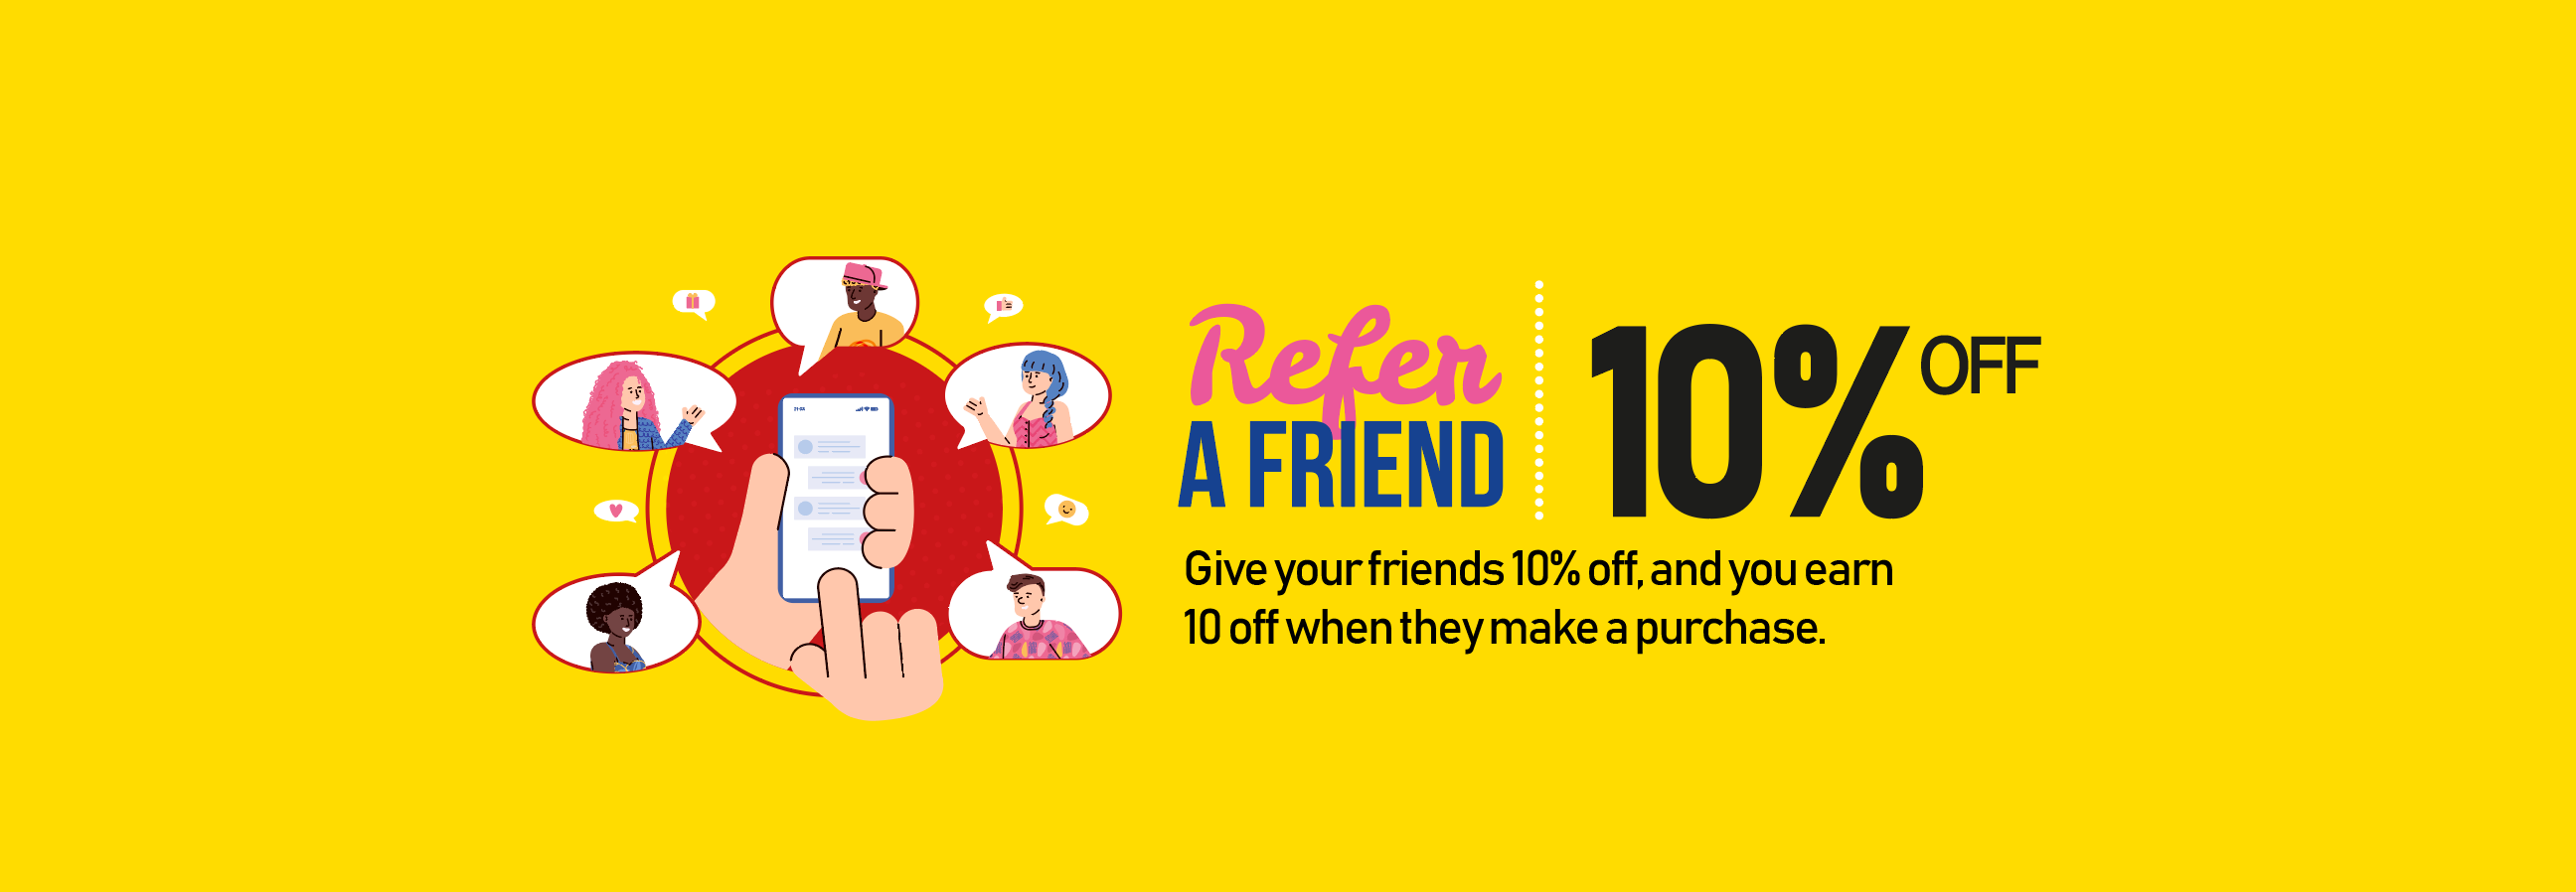 Refer a friend to get 10% off